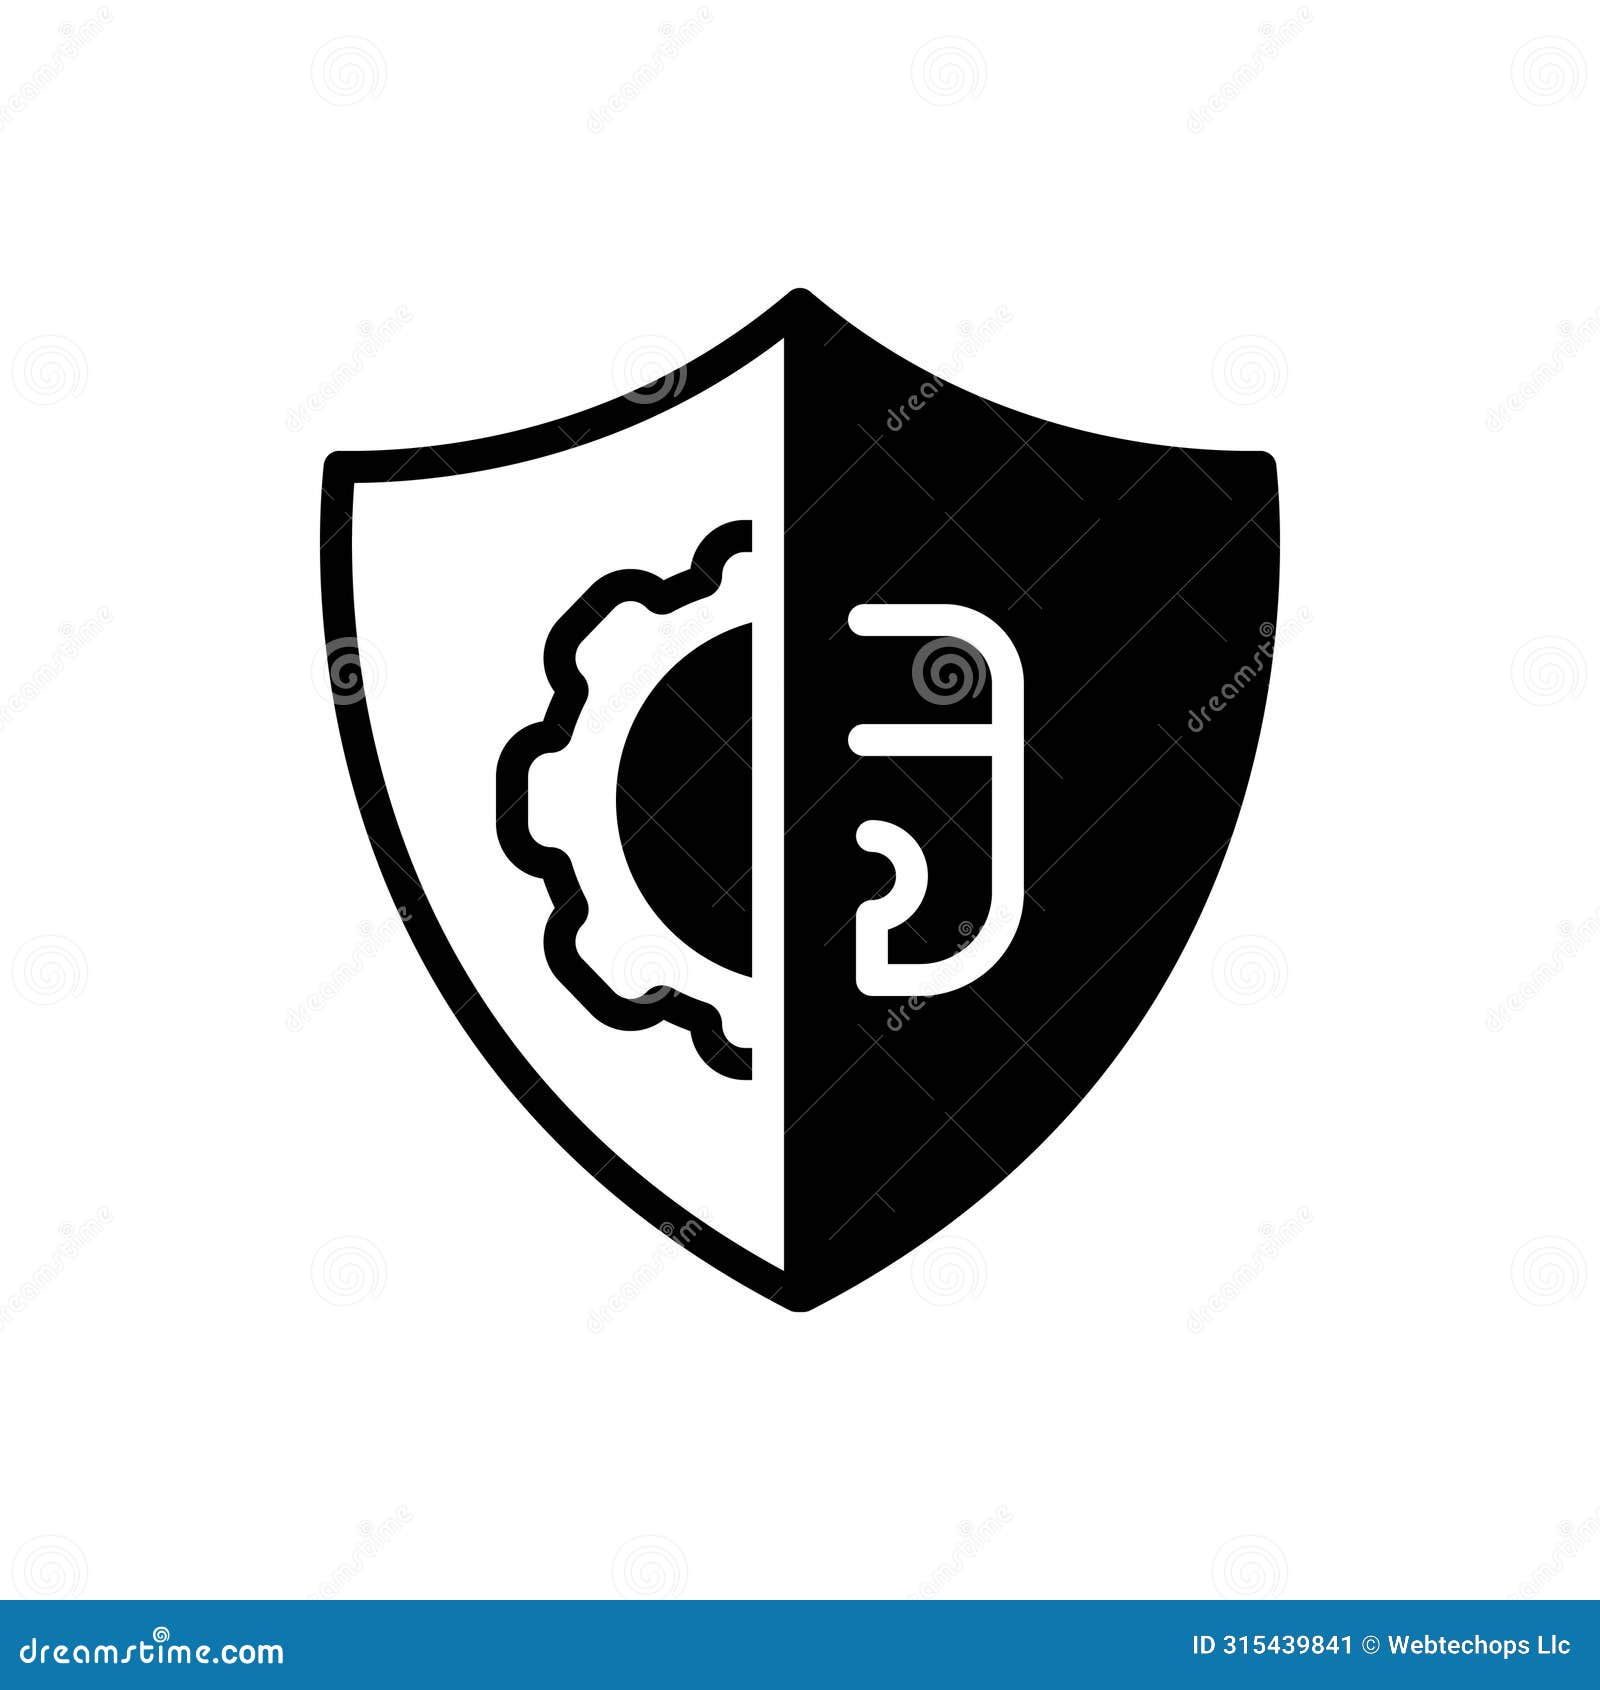 black solid icon for protect, defend and folder